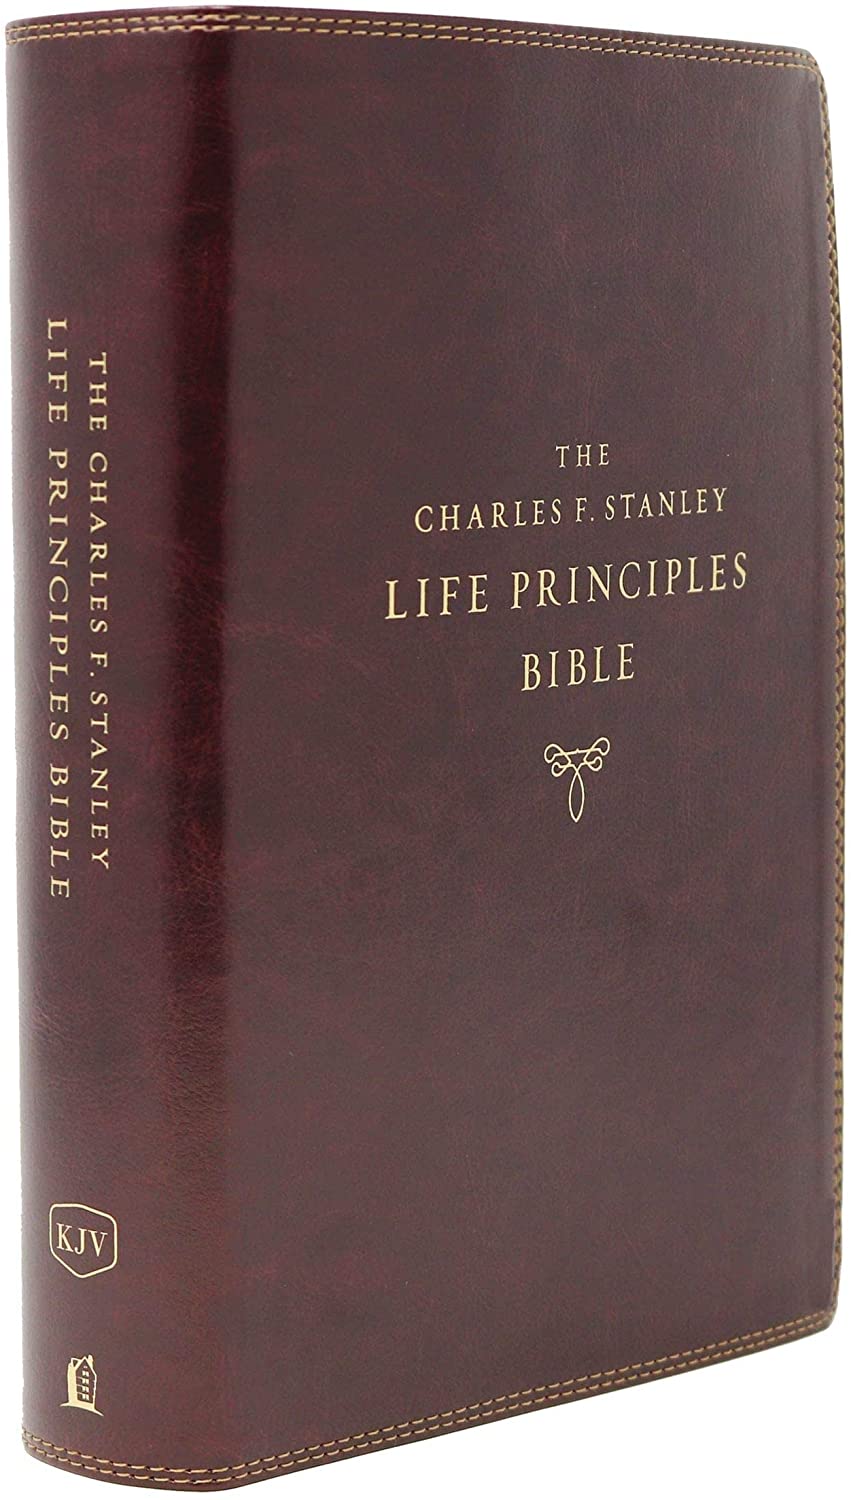 Personalized KJV Charles F. Stanley Life Principles Bible 2nd Edition Leathersoft Burgundy Comfort Print